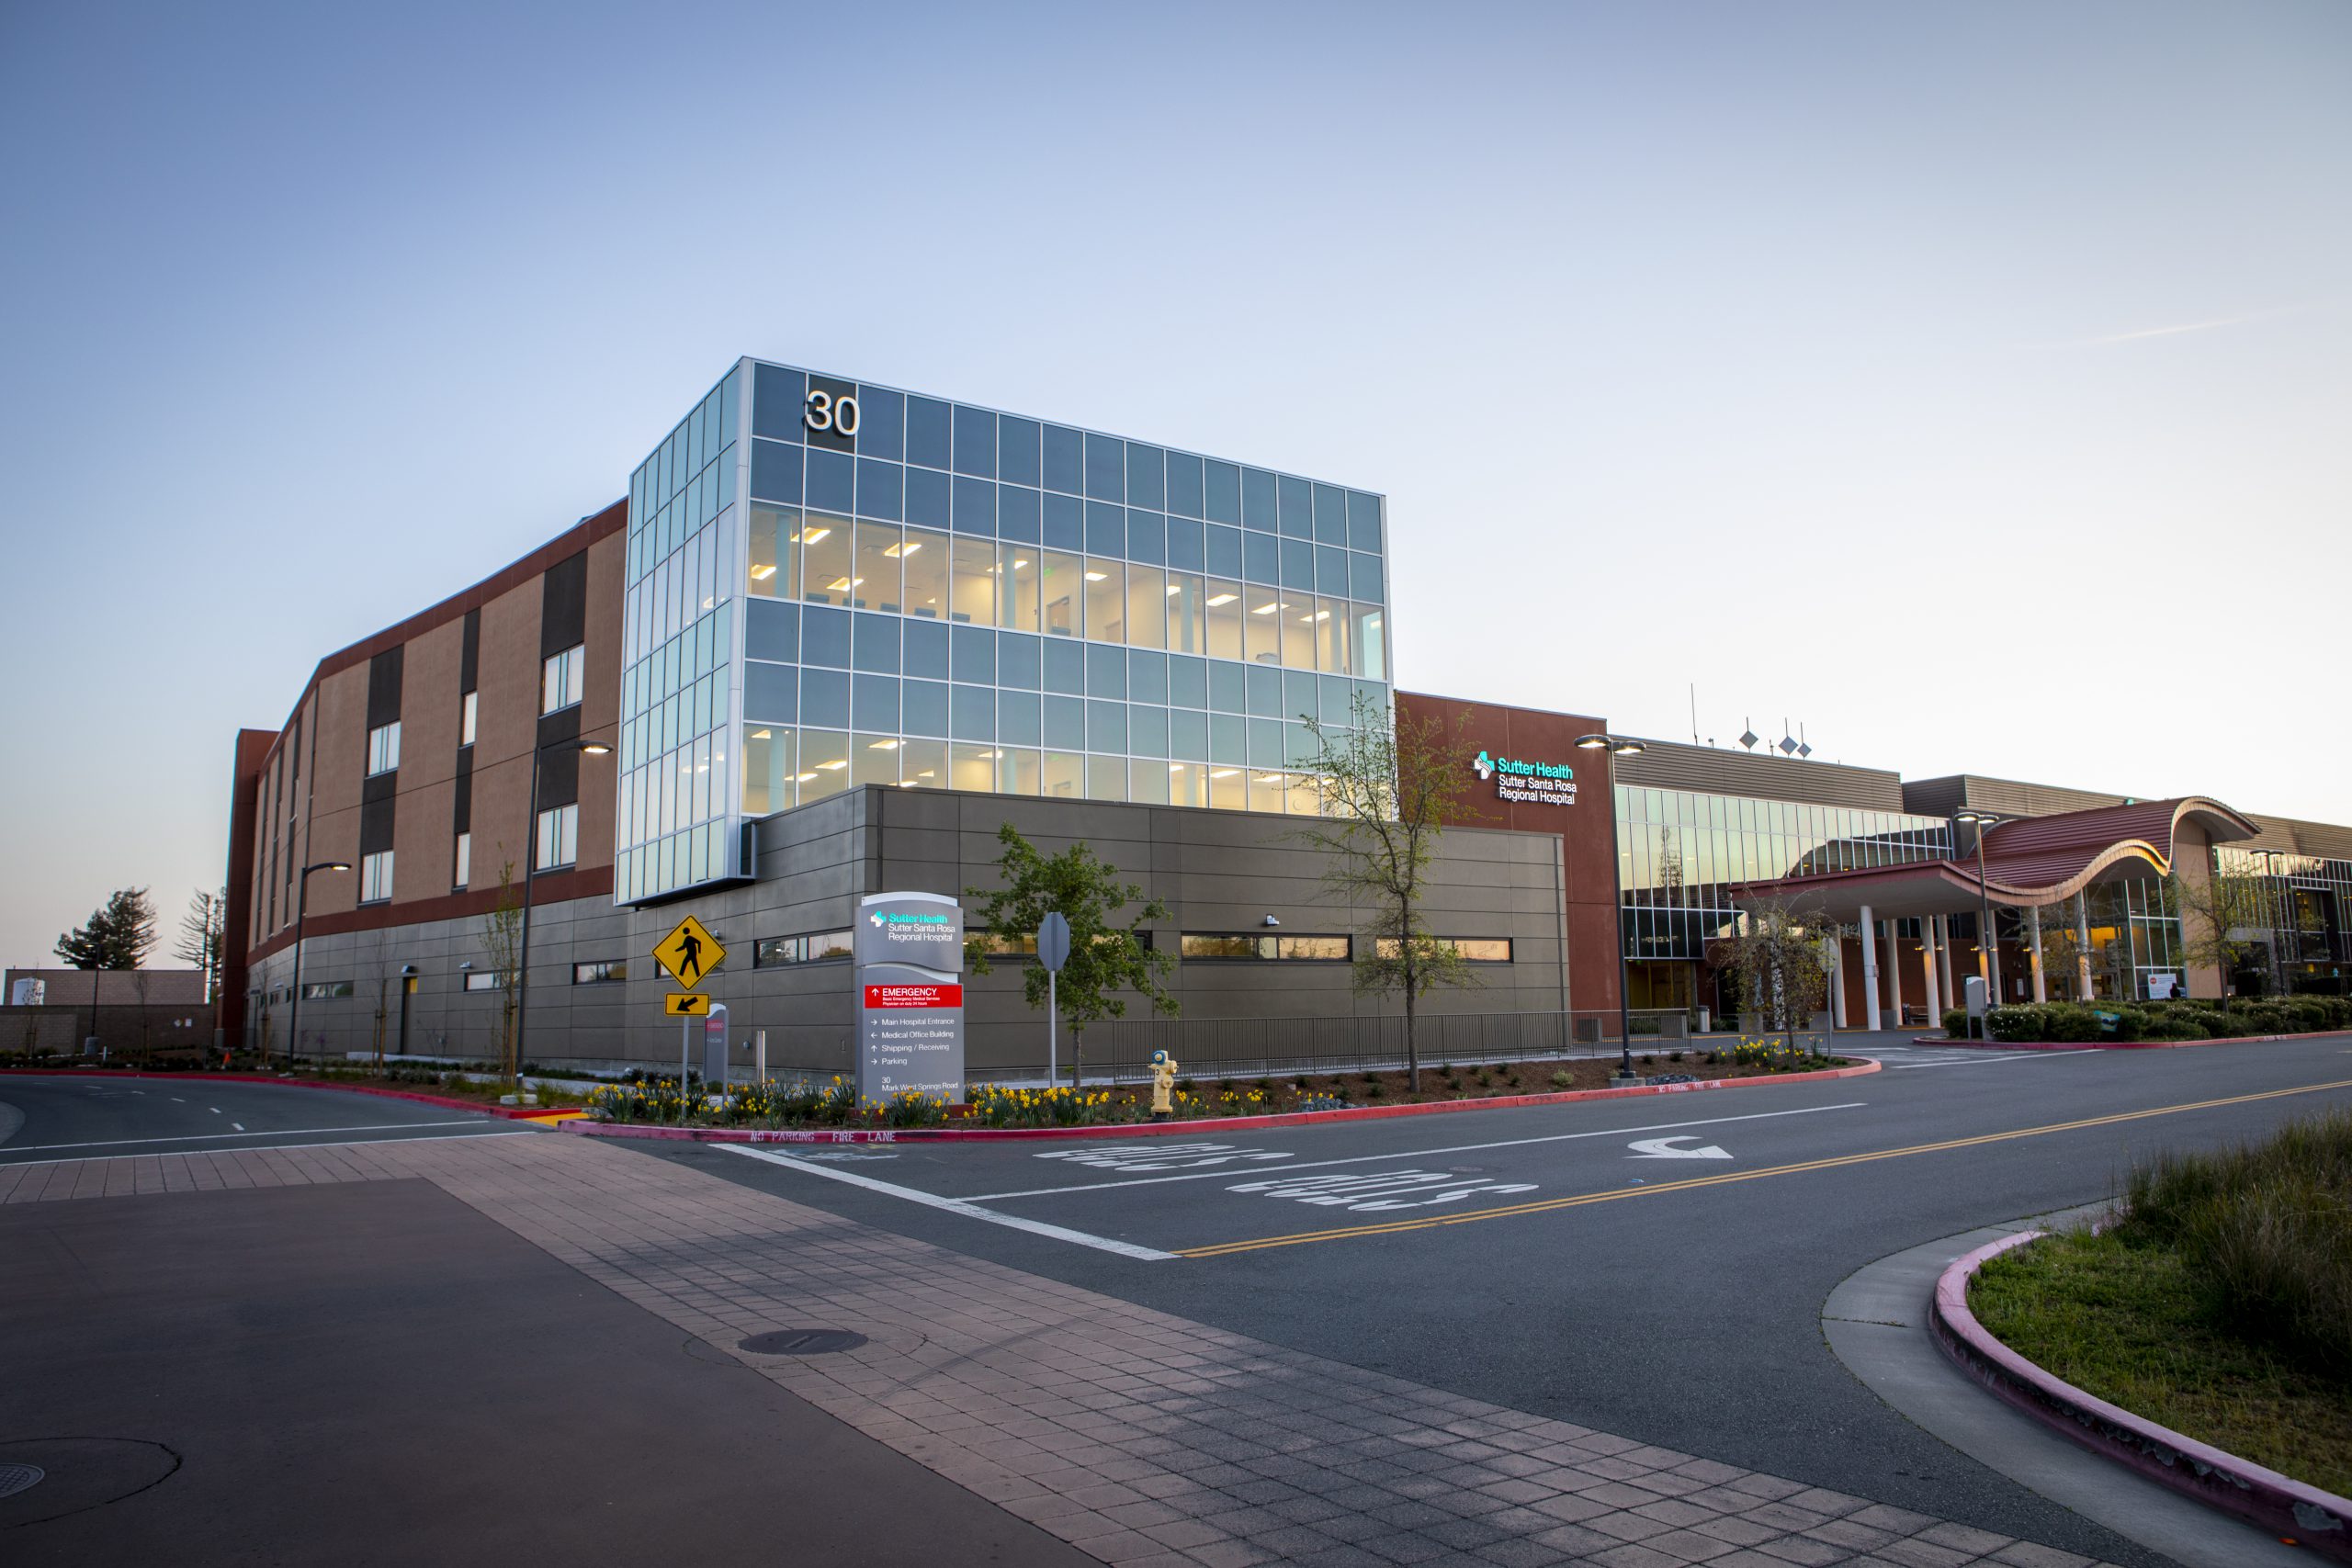 Santa Rosa Regional Hospital new three-story expansion tower is pictured at dusk with lights on inside the building, which features an all glass front.